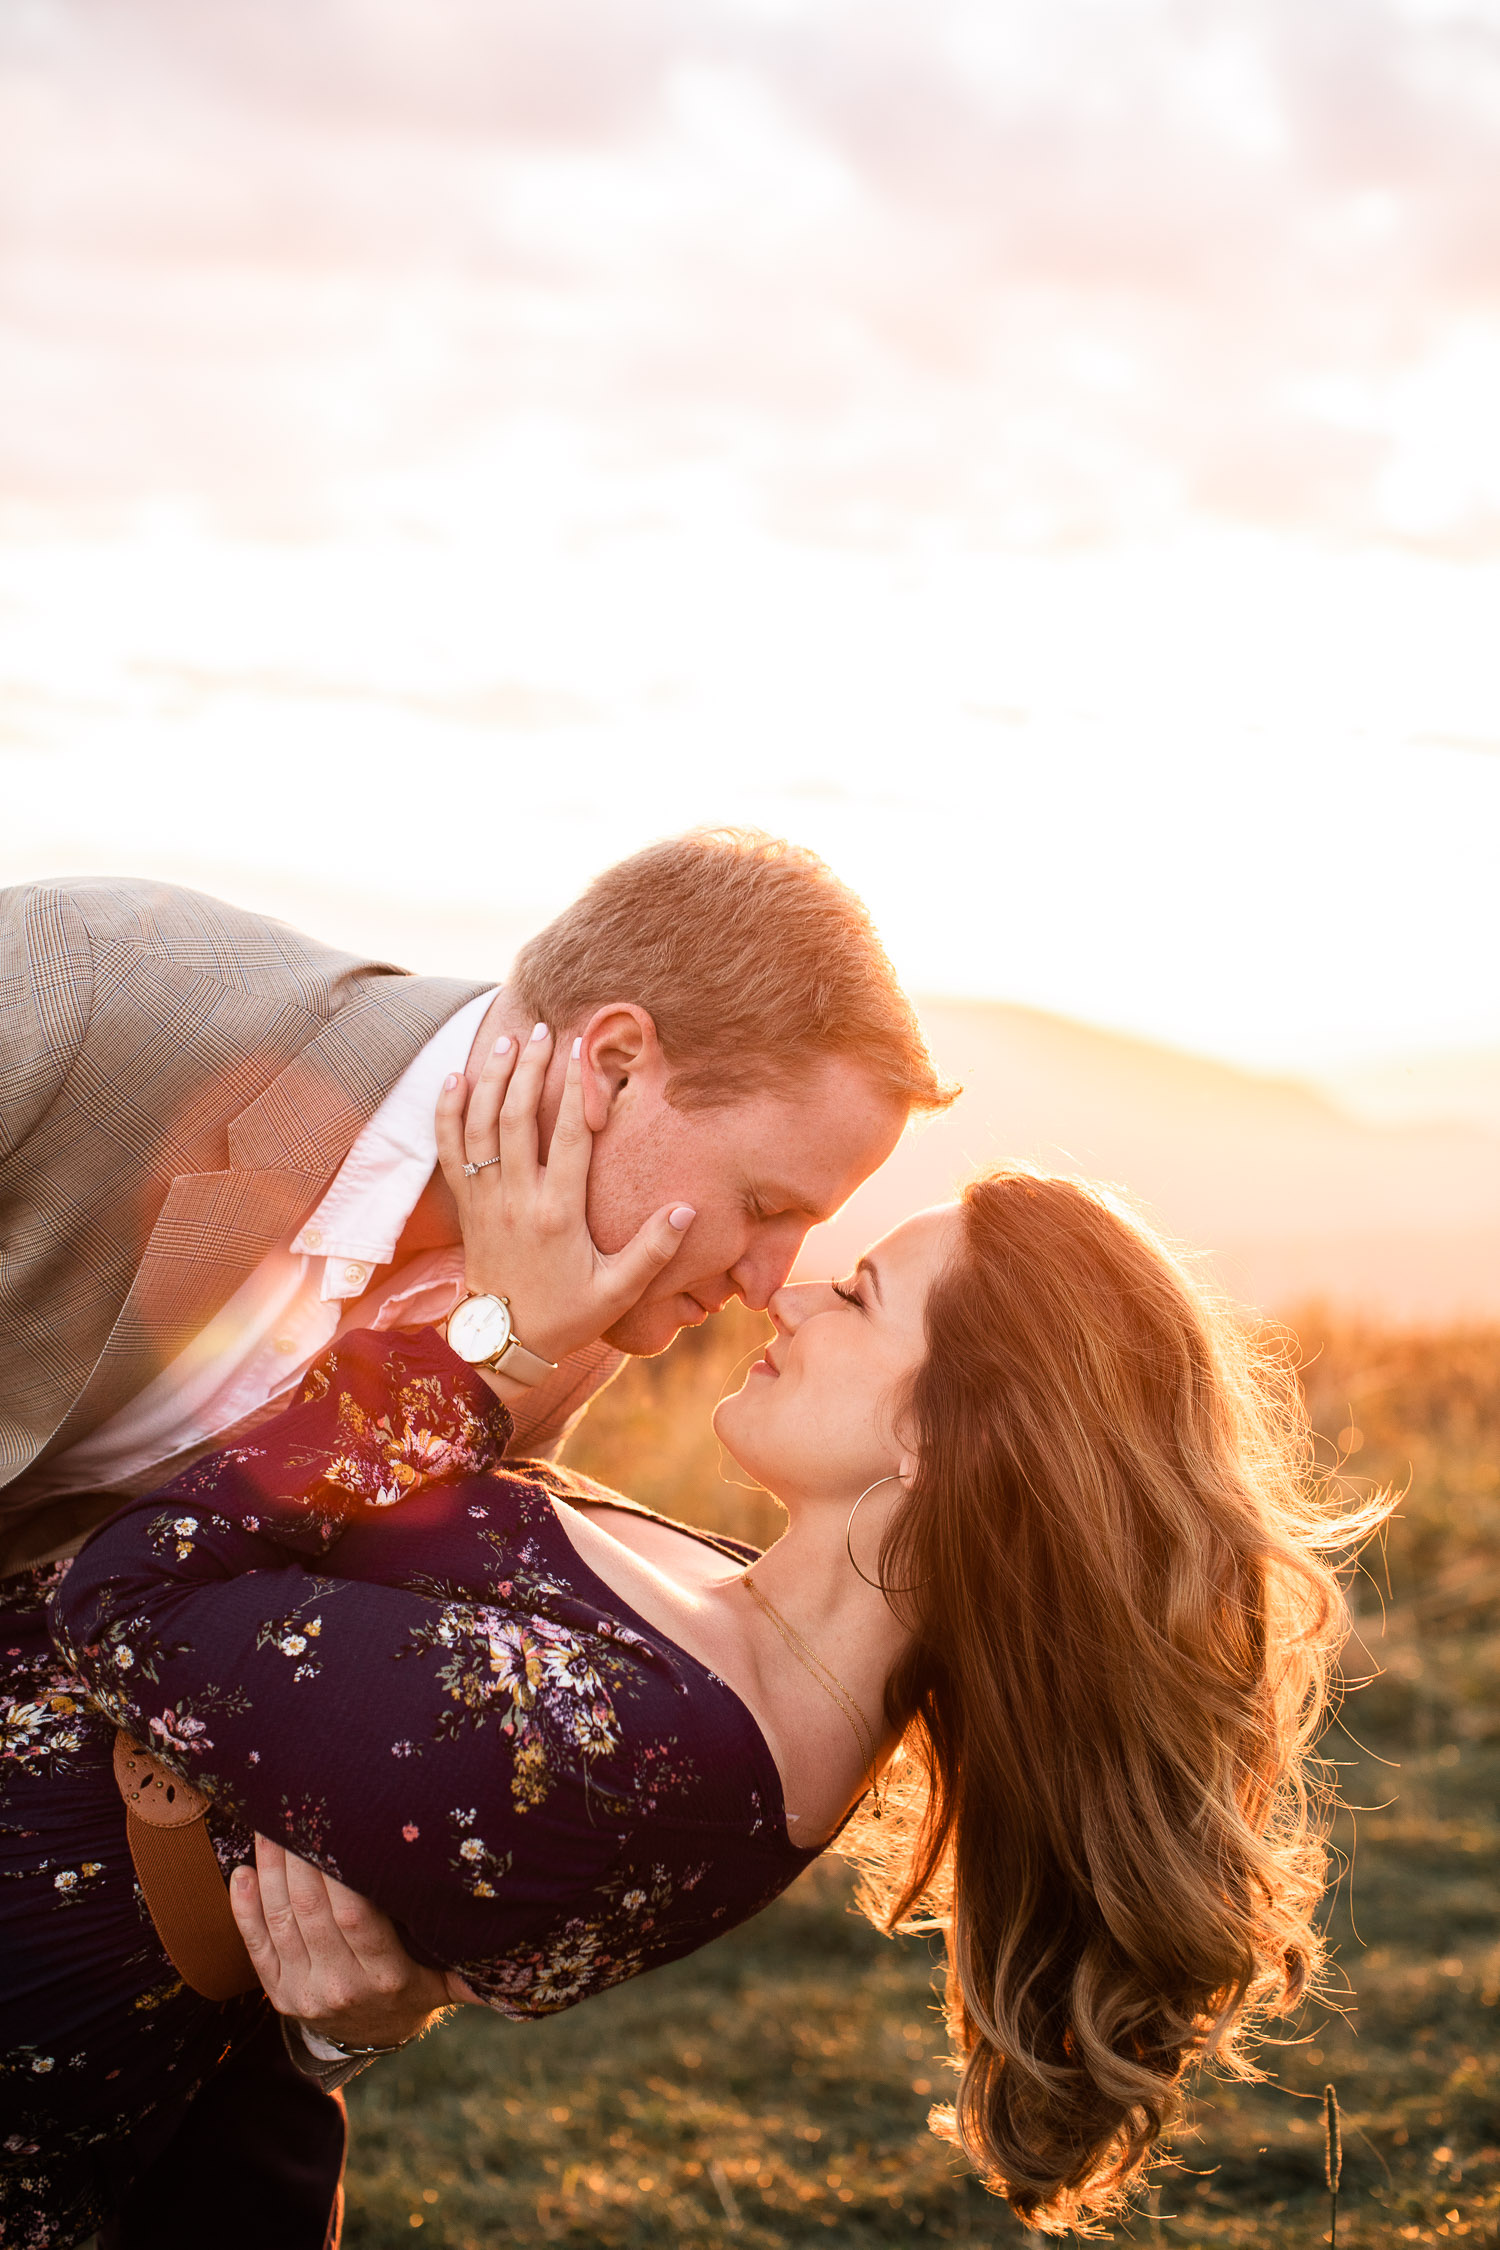 Max Patch Engagement session, Man dipping woman for a kiss during sunset